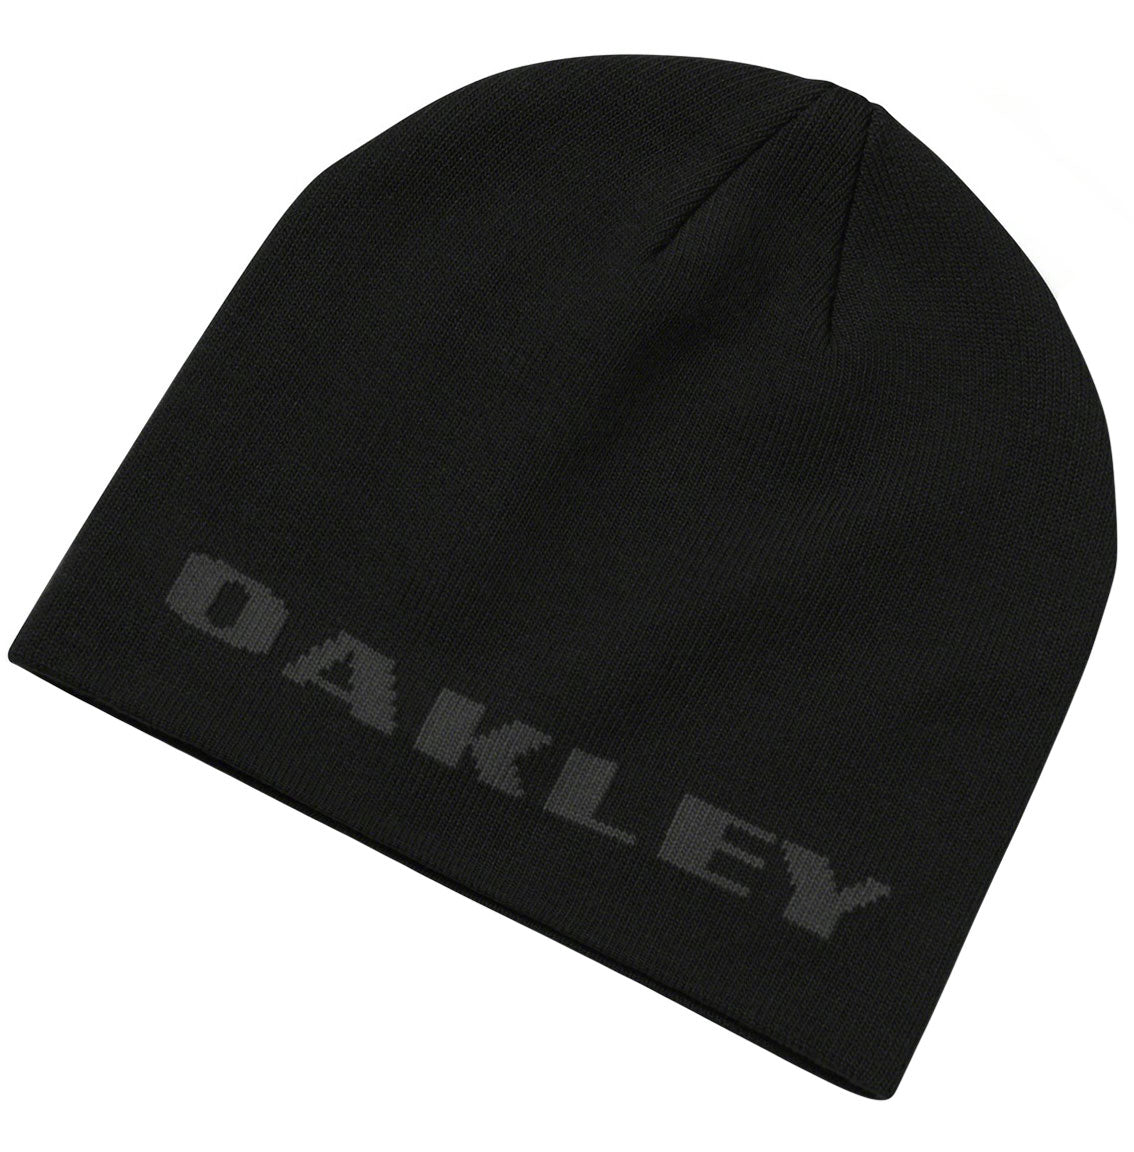 Oakley Fall 2017 Accessories | Mens Lifestyle Beanies